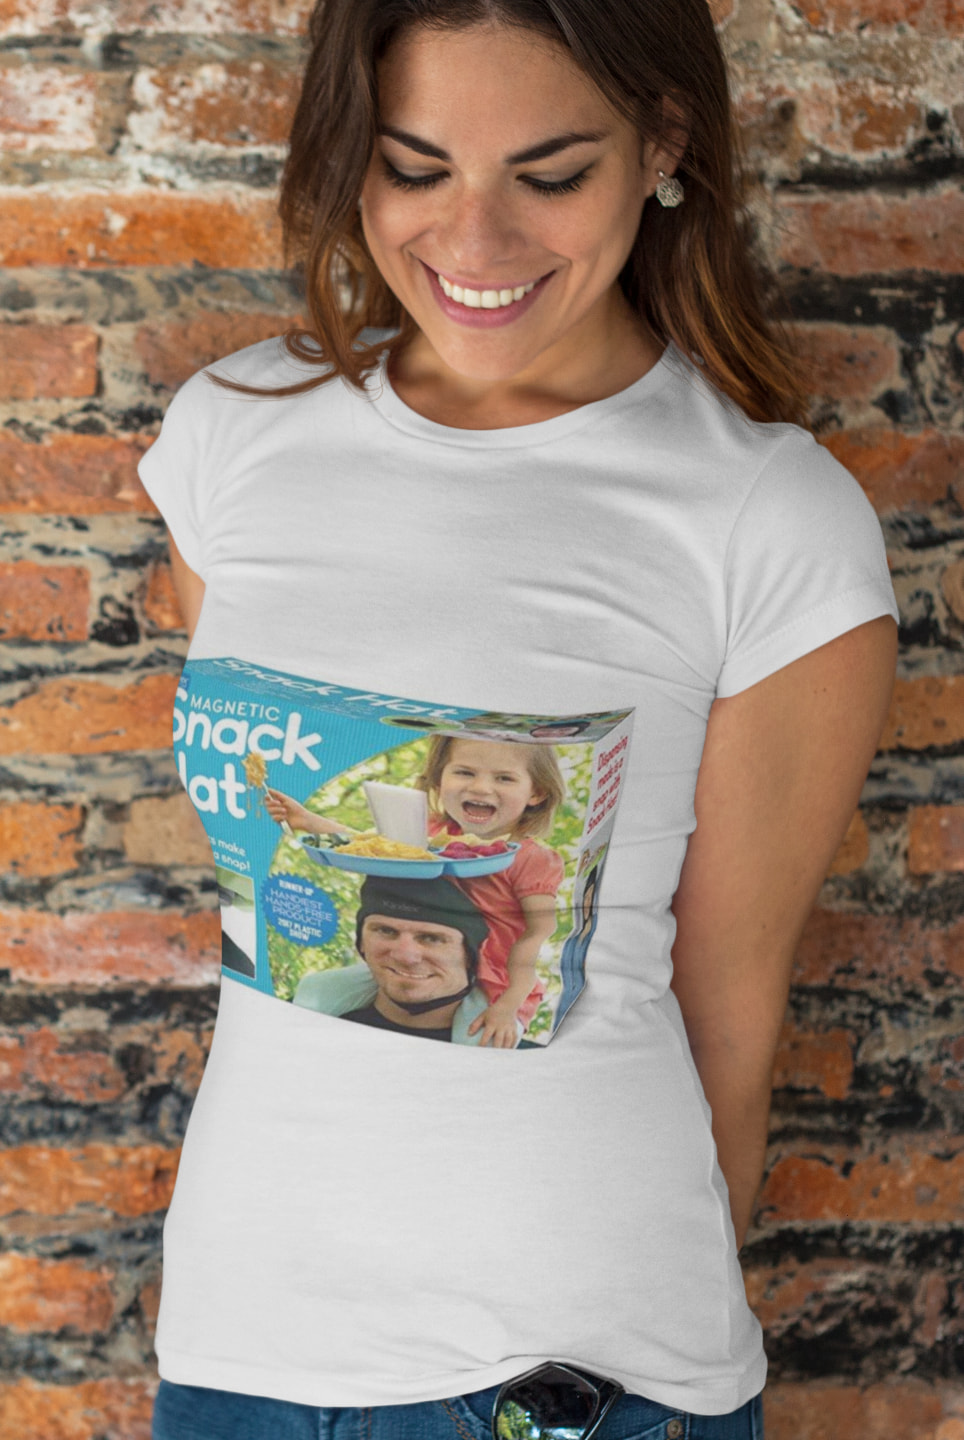 The Snack Hat Shirt